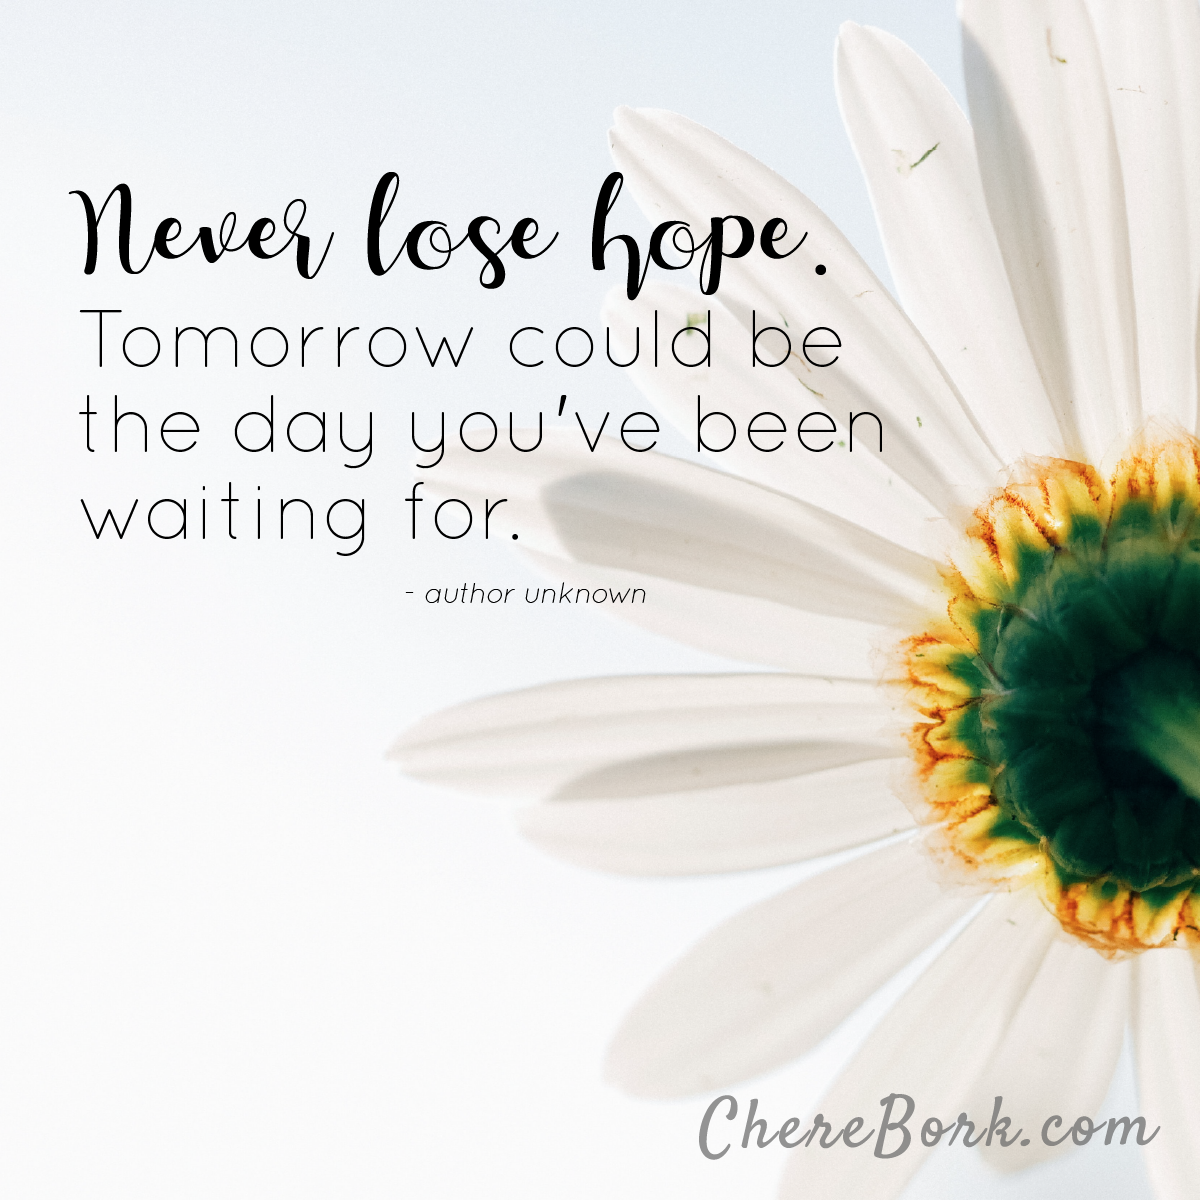 Never lose hope. Tomorrow could be the day you've been waiting for. -Author unknown